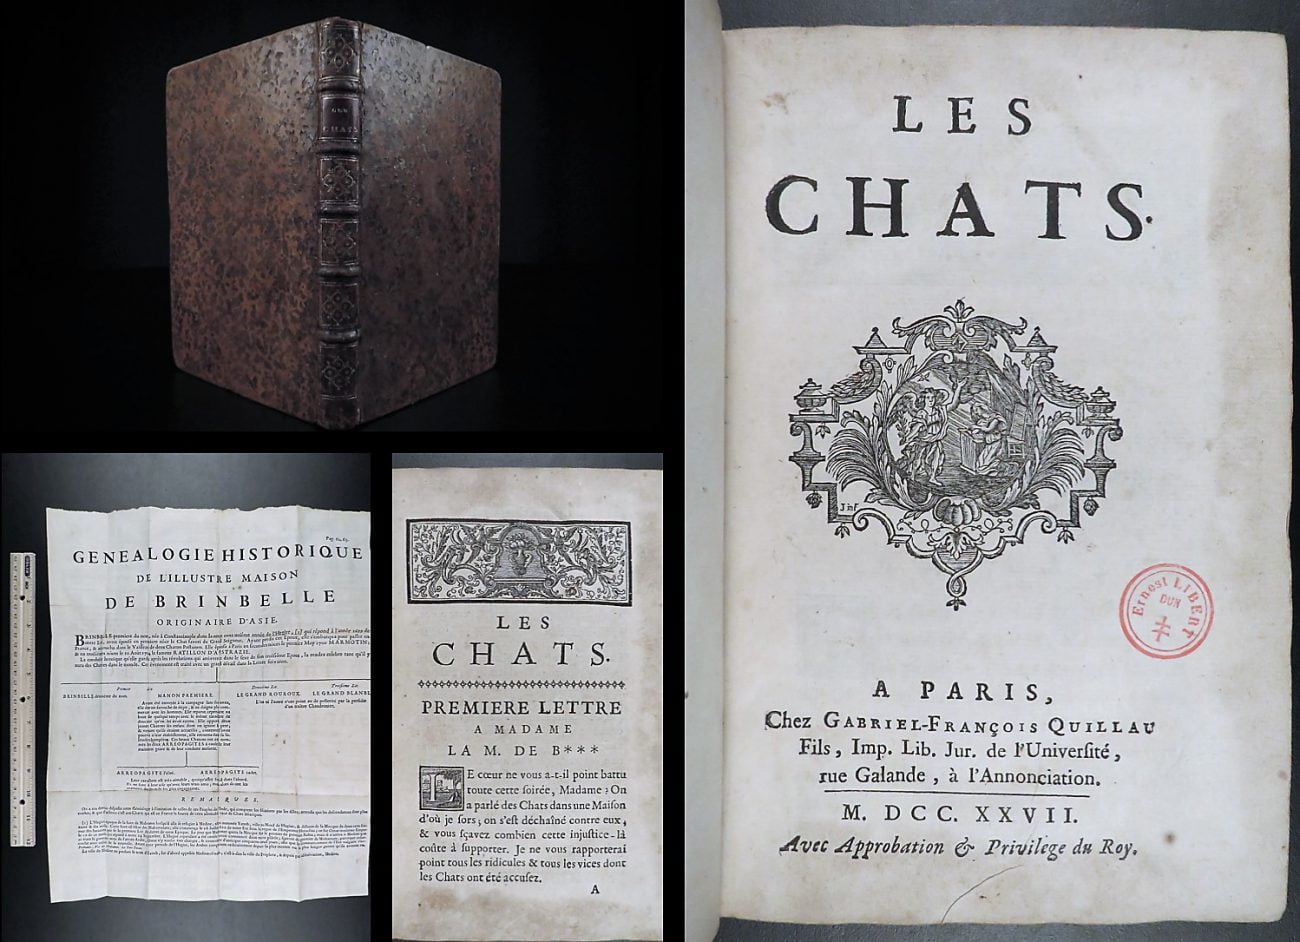 Les Chat published in 1727